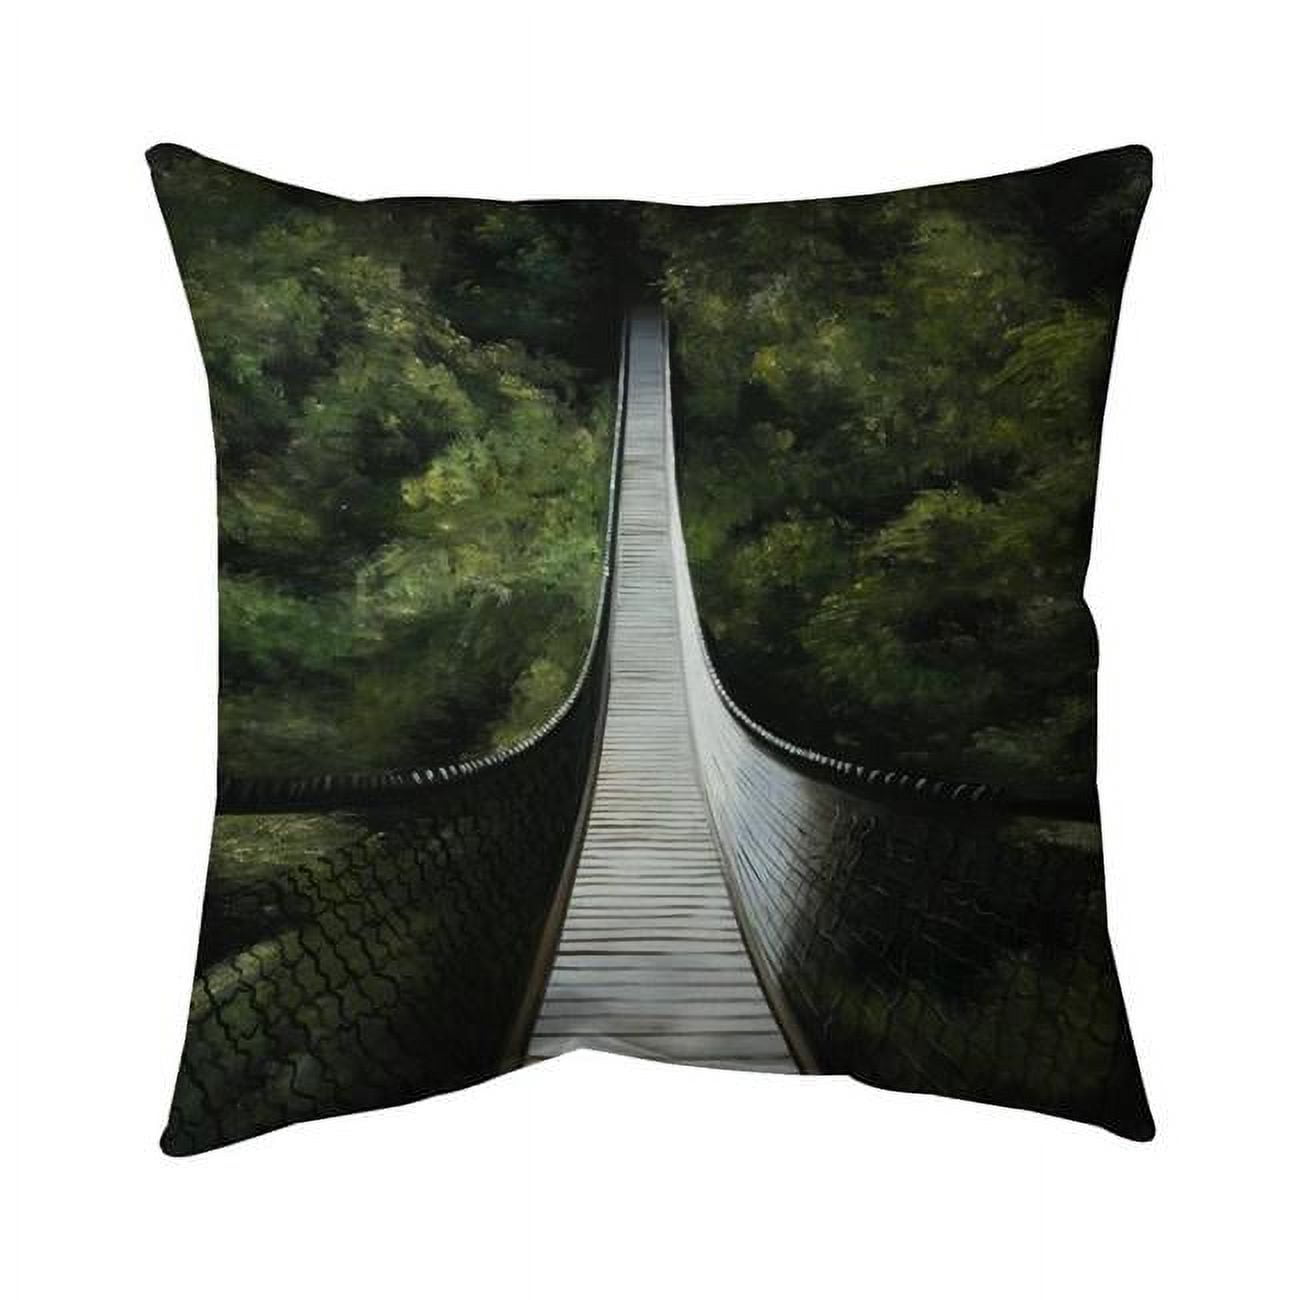 Begin Home Decor 5541-2626-LA145 26 x 26 in. Suspended Bridge in the Forest-Double Sided Print Indoor Pillow